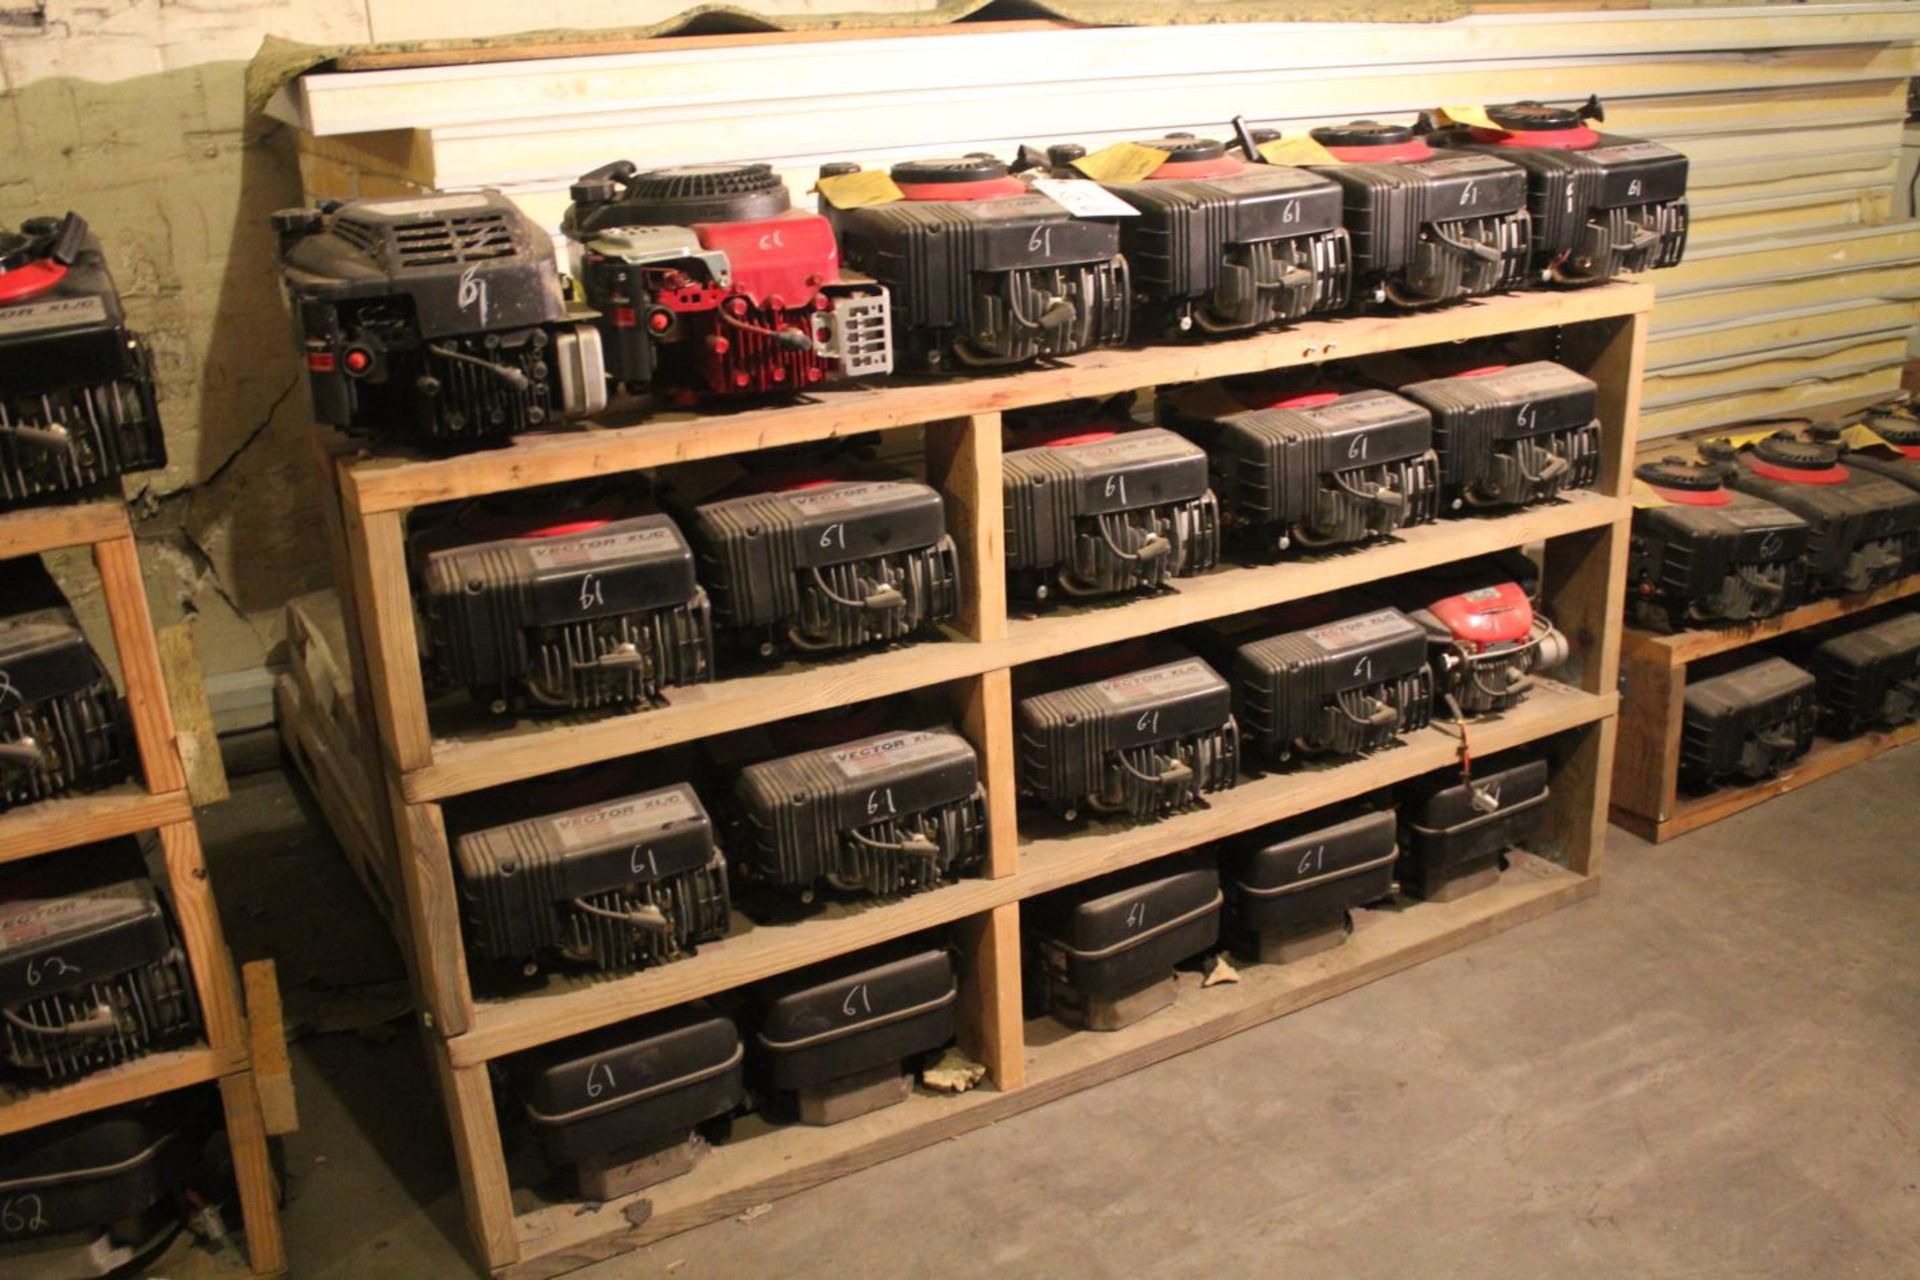 Tecumseh 6HP Vector XL/C Electric Start Gas Motors, Engine Model VLV-126 New old Stock, 3 are